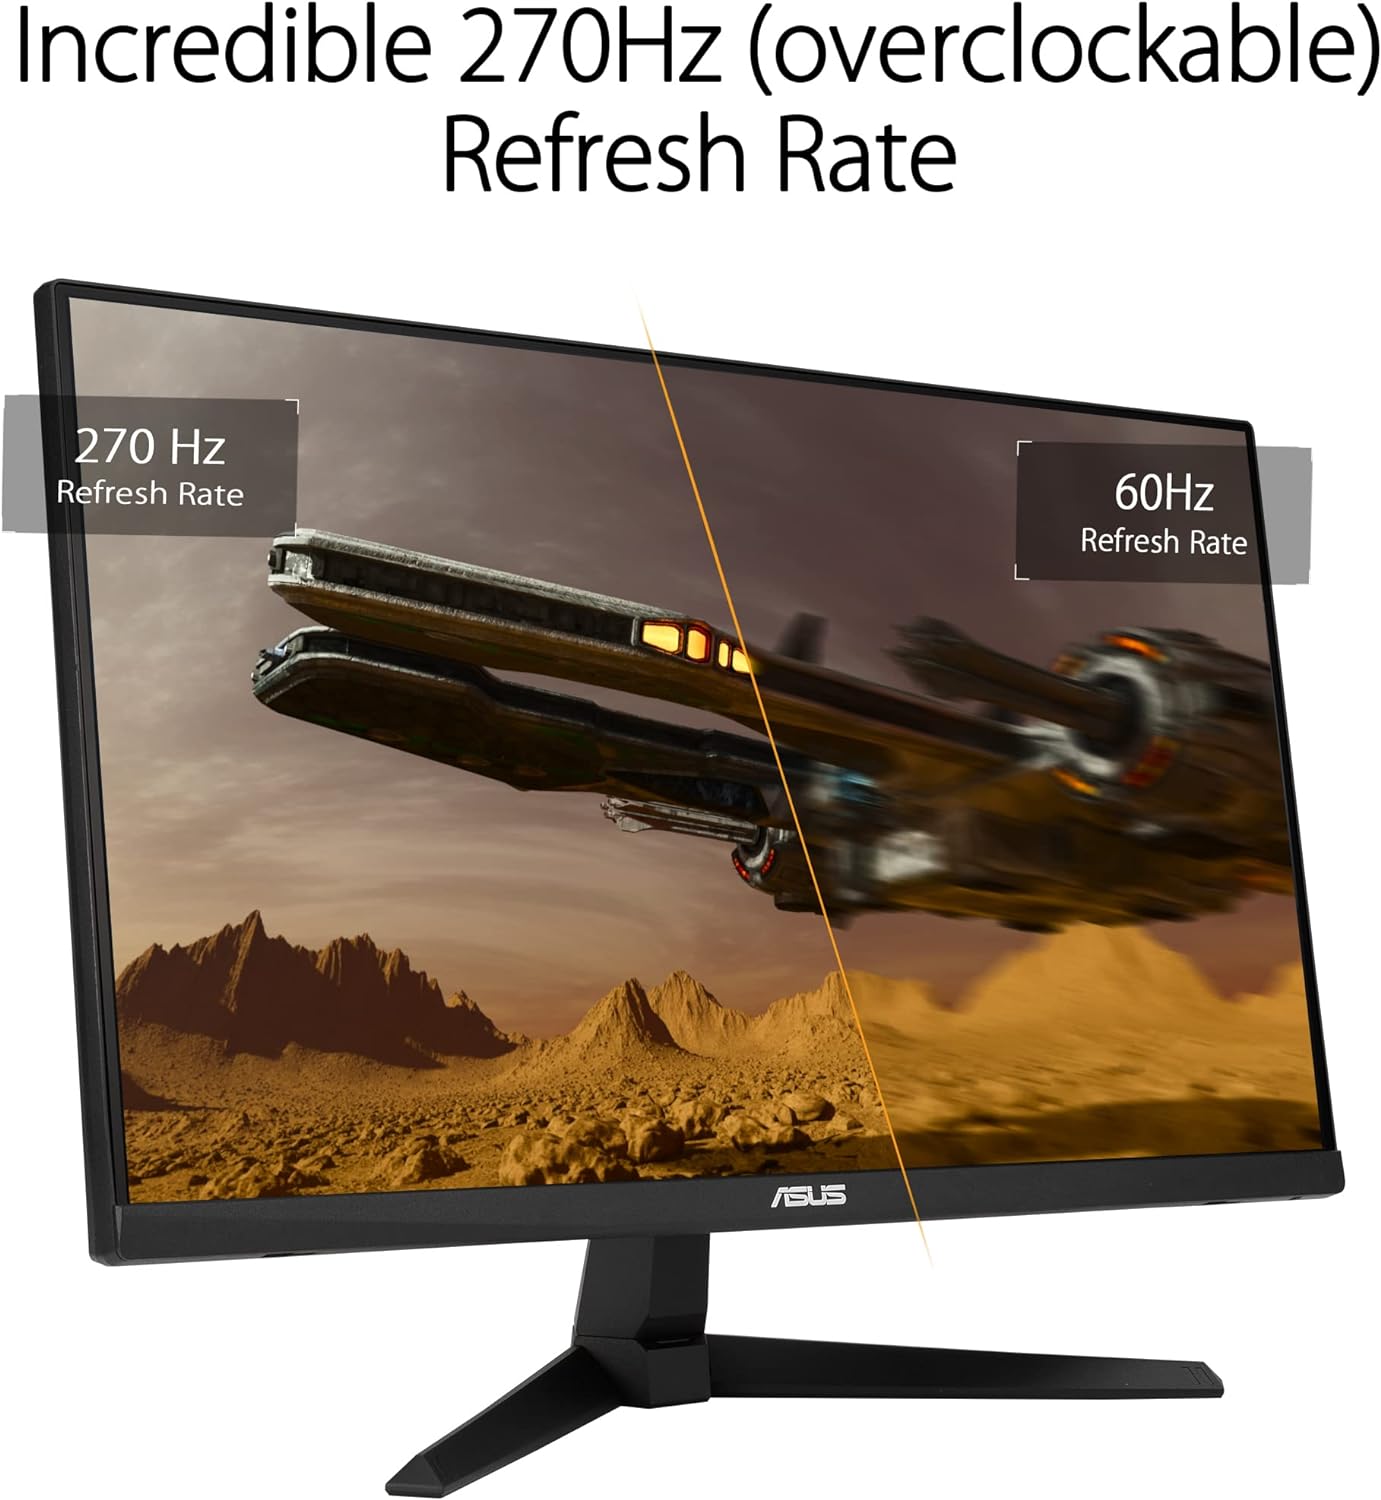 ASUS TUF Gaming VG249QM1A 24 inch FHD , IPS, 270 Hz Gaming Monitor